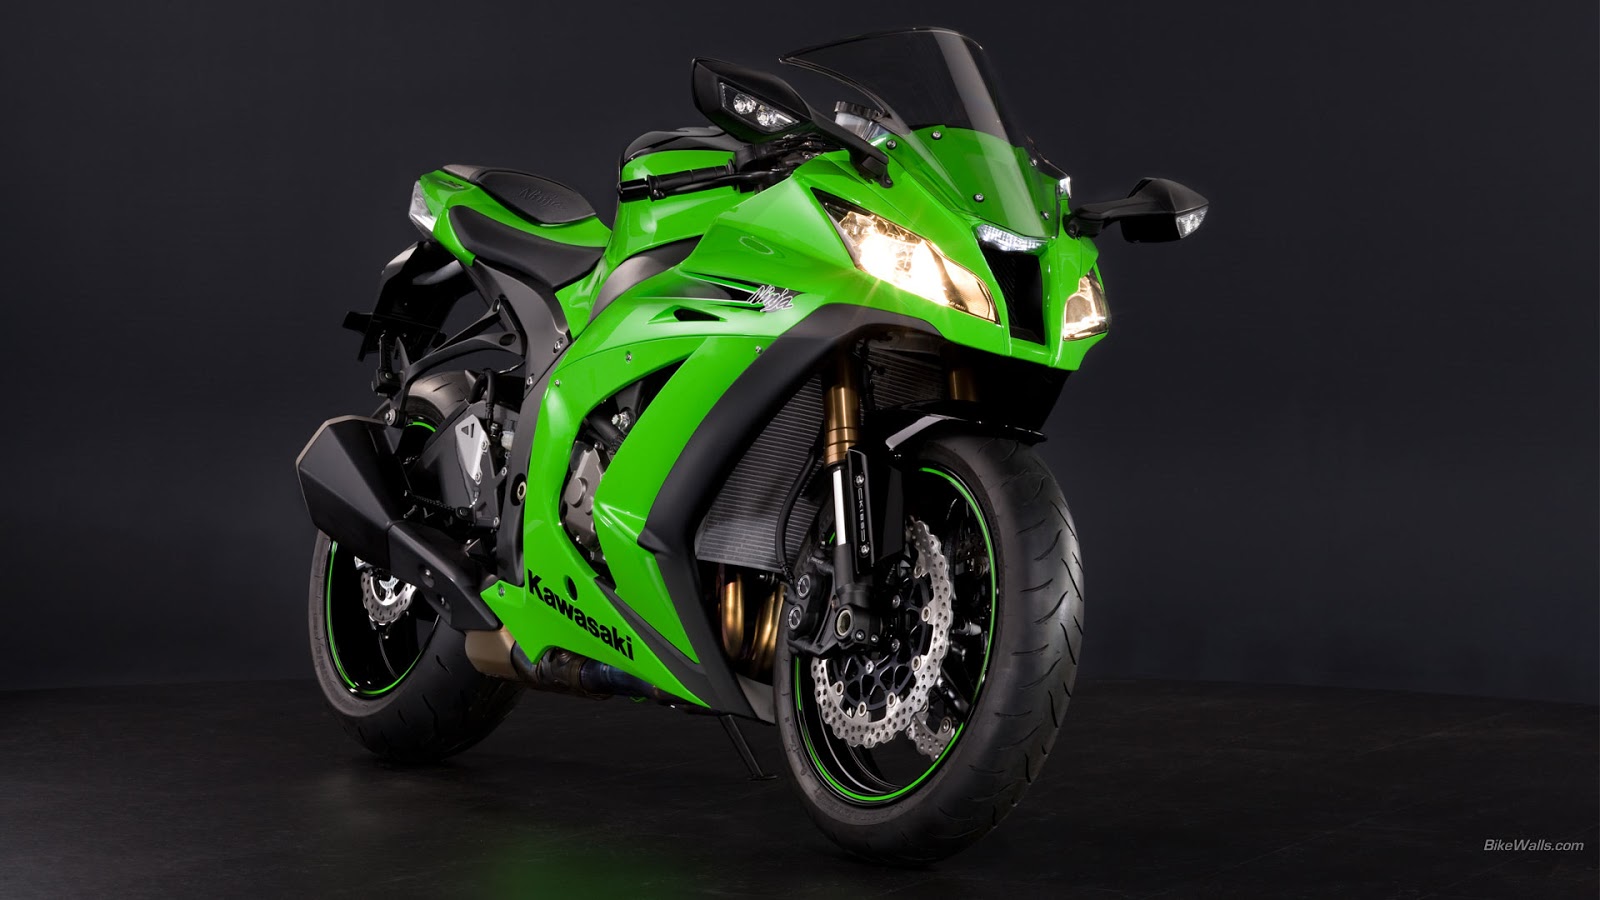 Dunia Otomotifbroblogspotcoid THE BEST SUPERBIKE ZX 10R